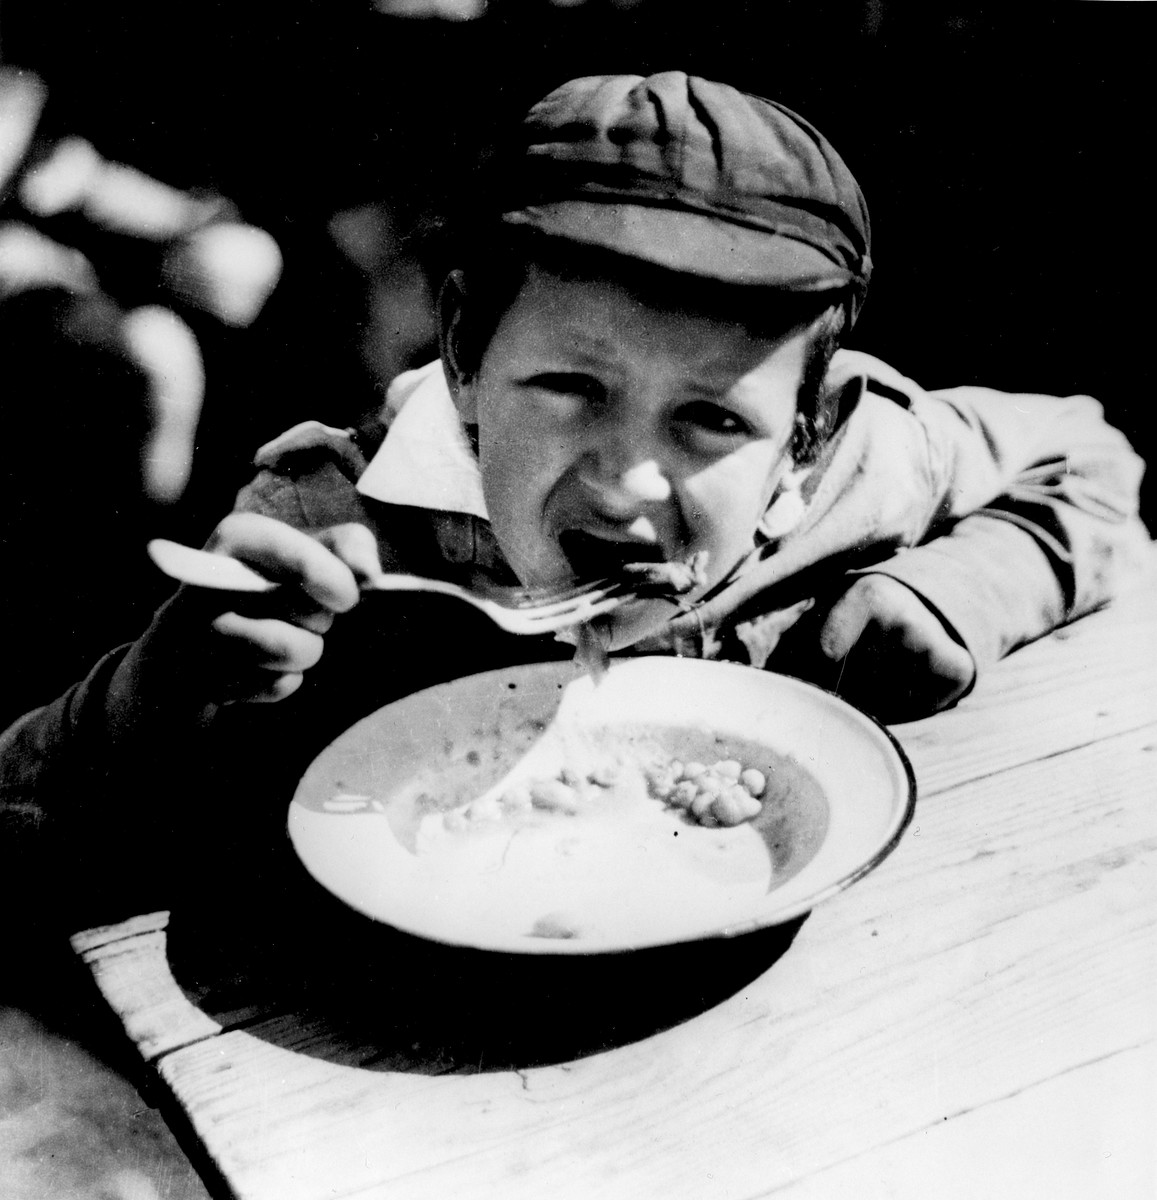 A child eats a meal in the TOZ summer home in Wisniowa Gora.  

The TOZ (Society for the Safeguarding of the Health of the Jewish Population) is an affiliate of the international OSE/OZE organization. This summer home provided free housing, food, education, and physical activity for approximately forty impoverished boys, children of factory workers, for a period of three weeks.